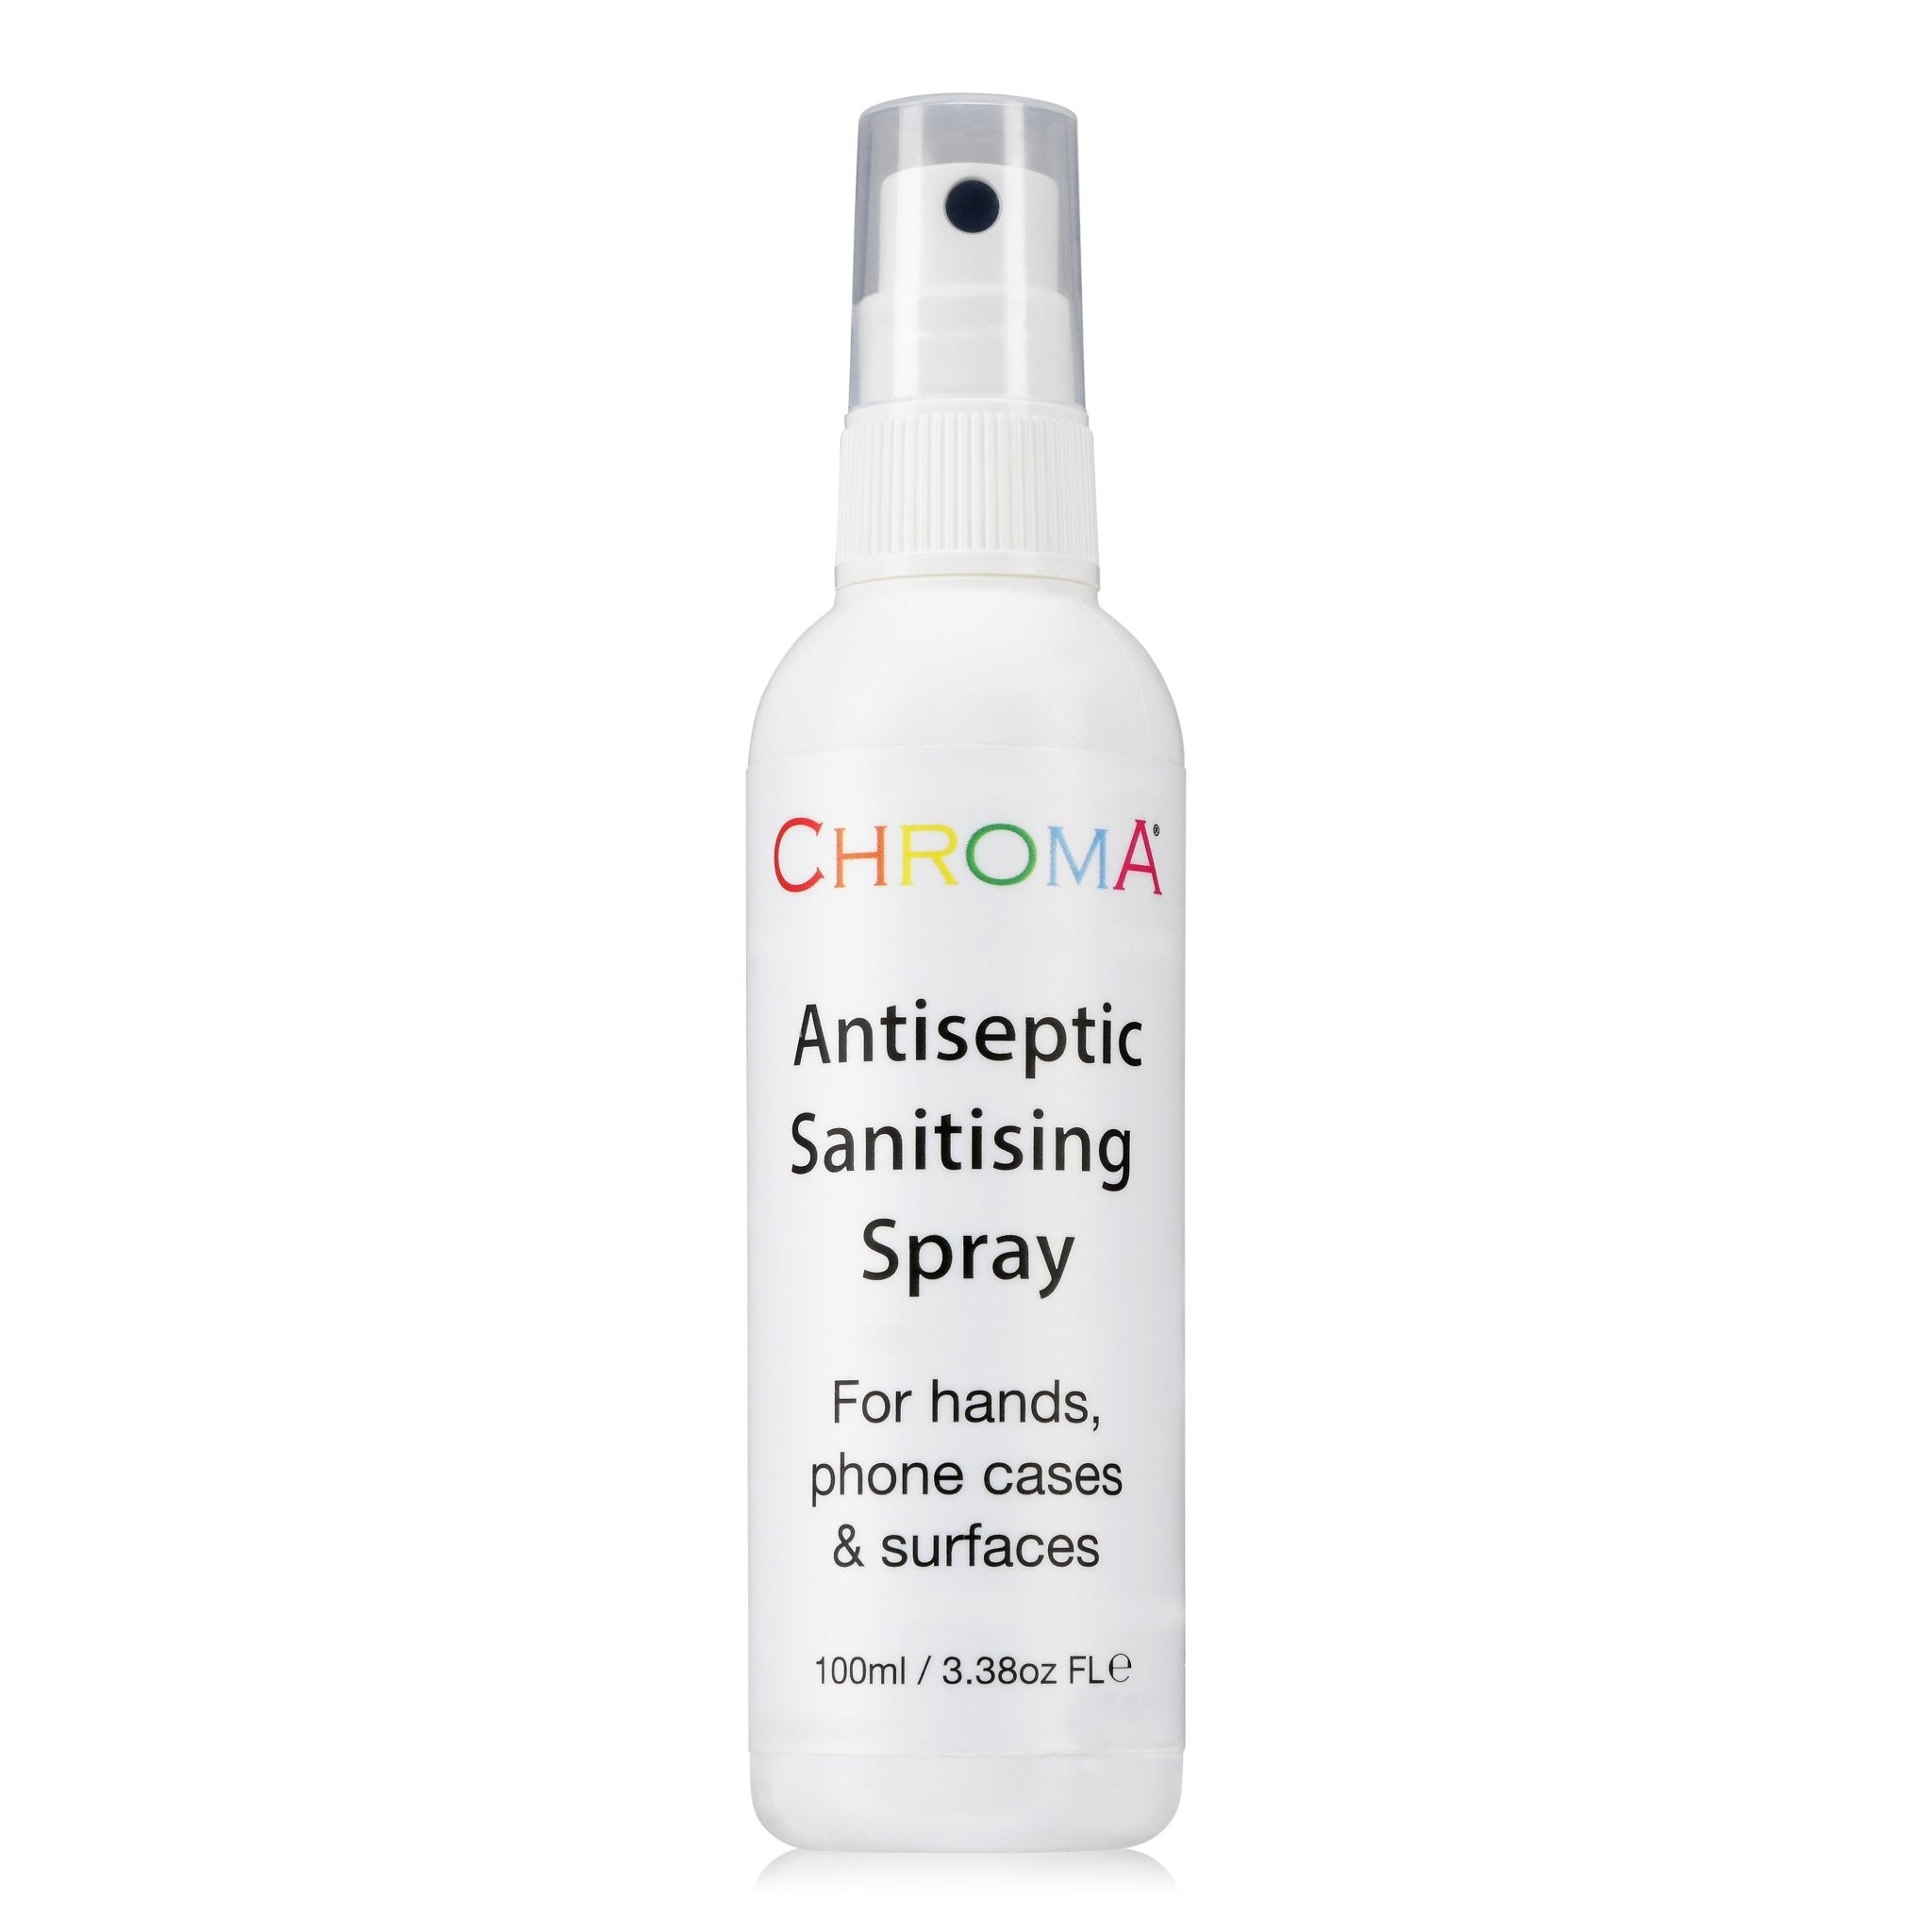 Antiseptic Sanitising Spray 70% Alcohol for hands, phone cases and Surfaces - 100ml - Beauty Hair Products LtdChroma Gel